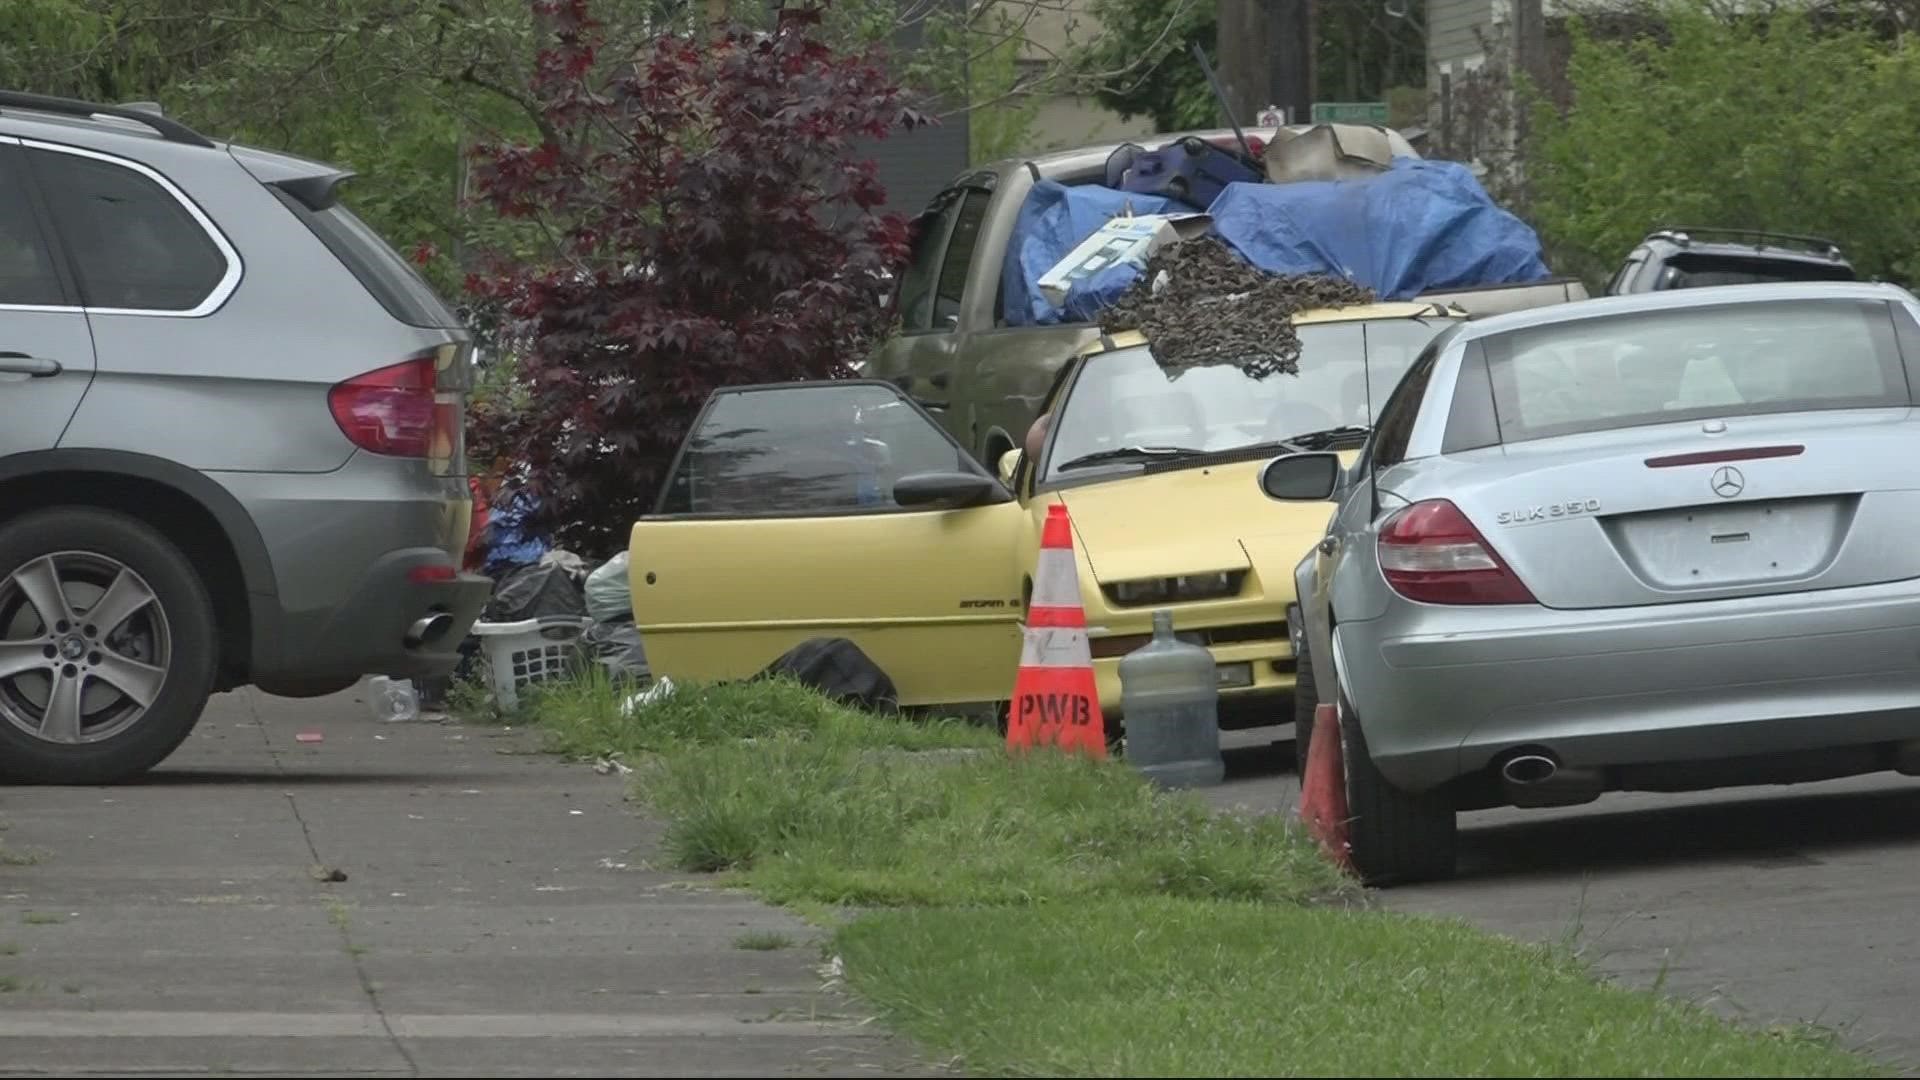 The city received more than 1,800 campsite reports just last week. One Southeast Portland neighborhood says their reports are ignored and they feel unsafe.